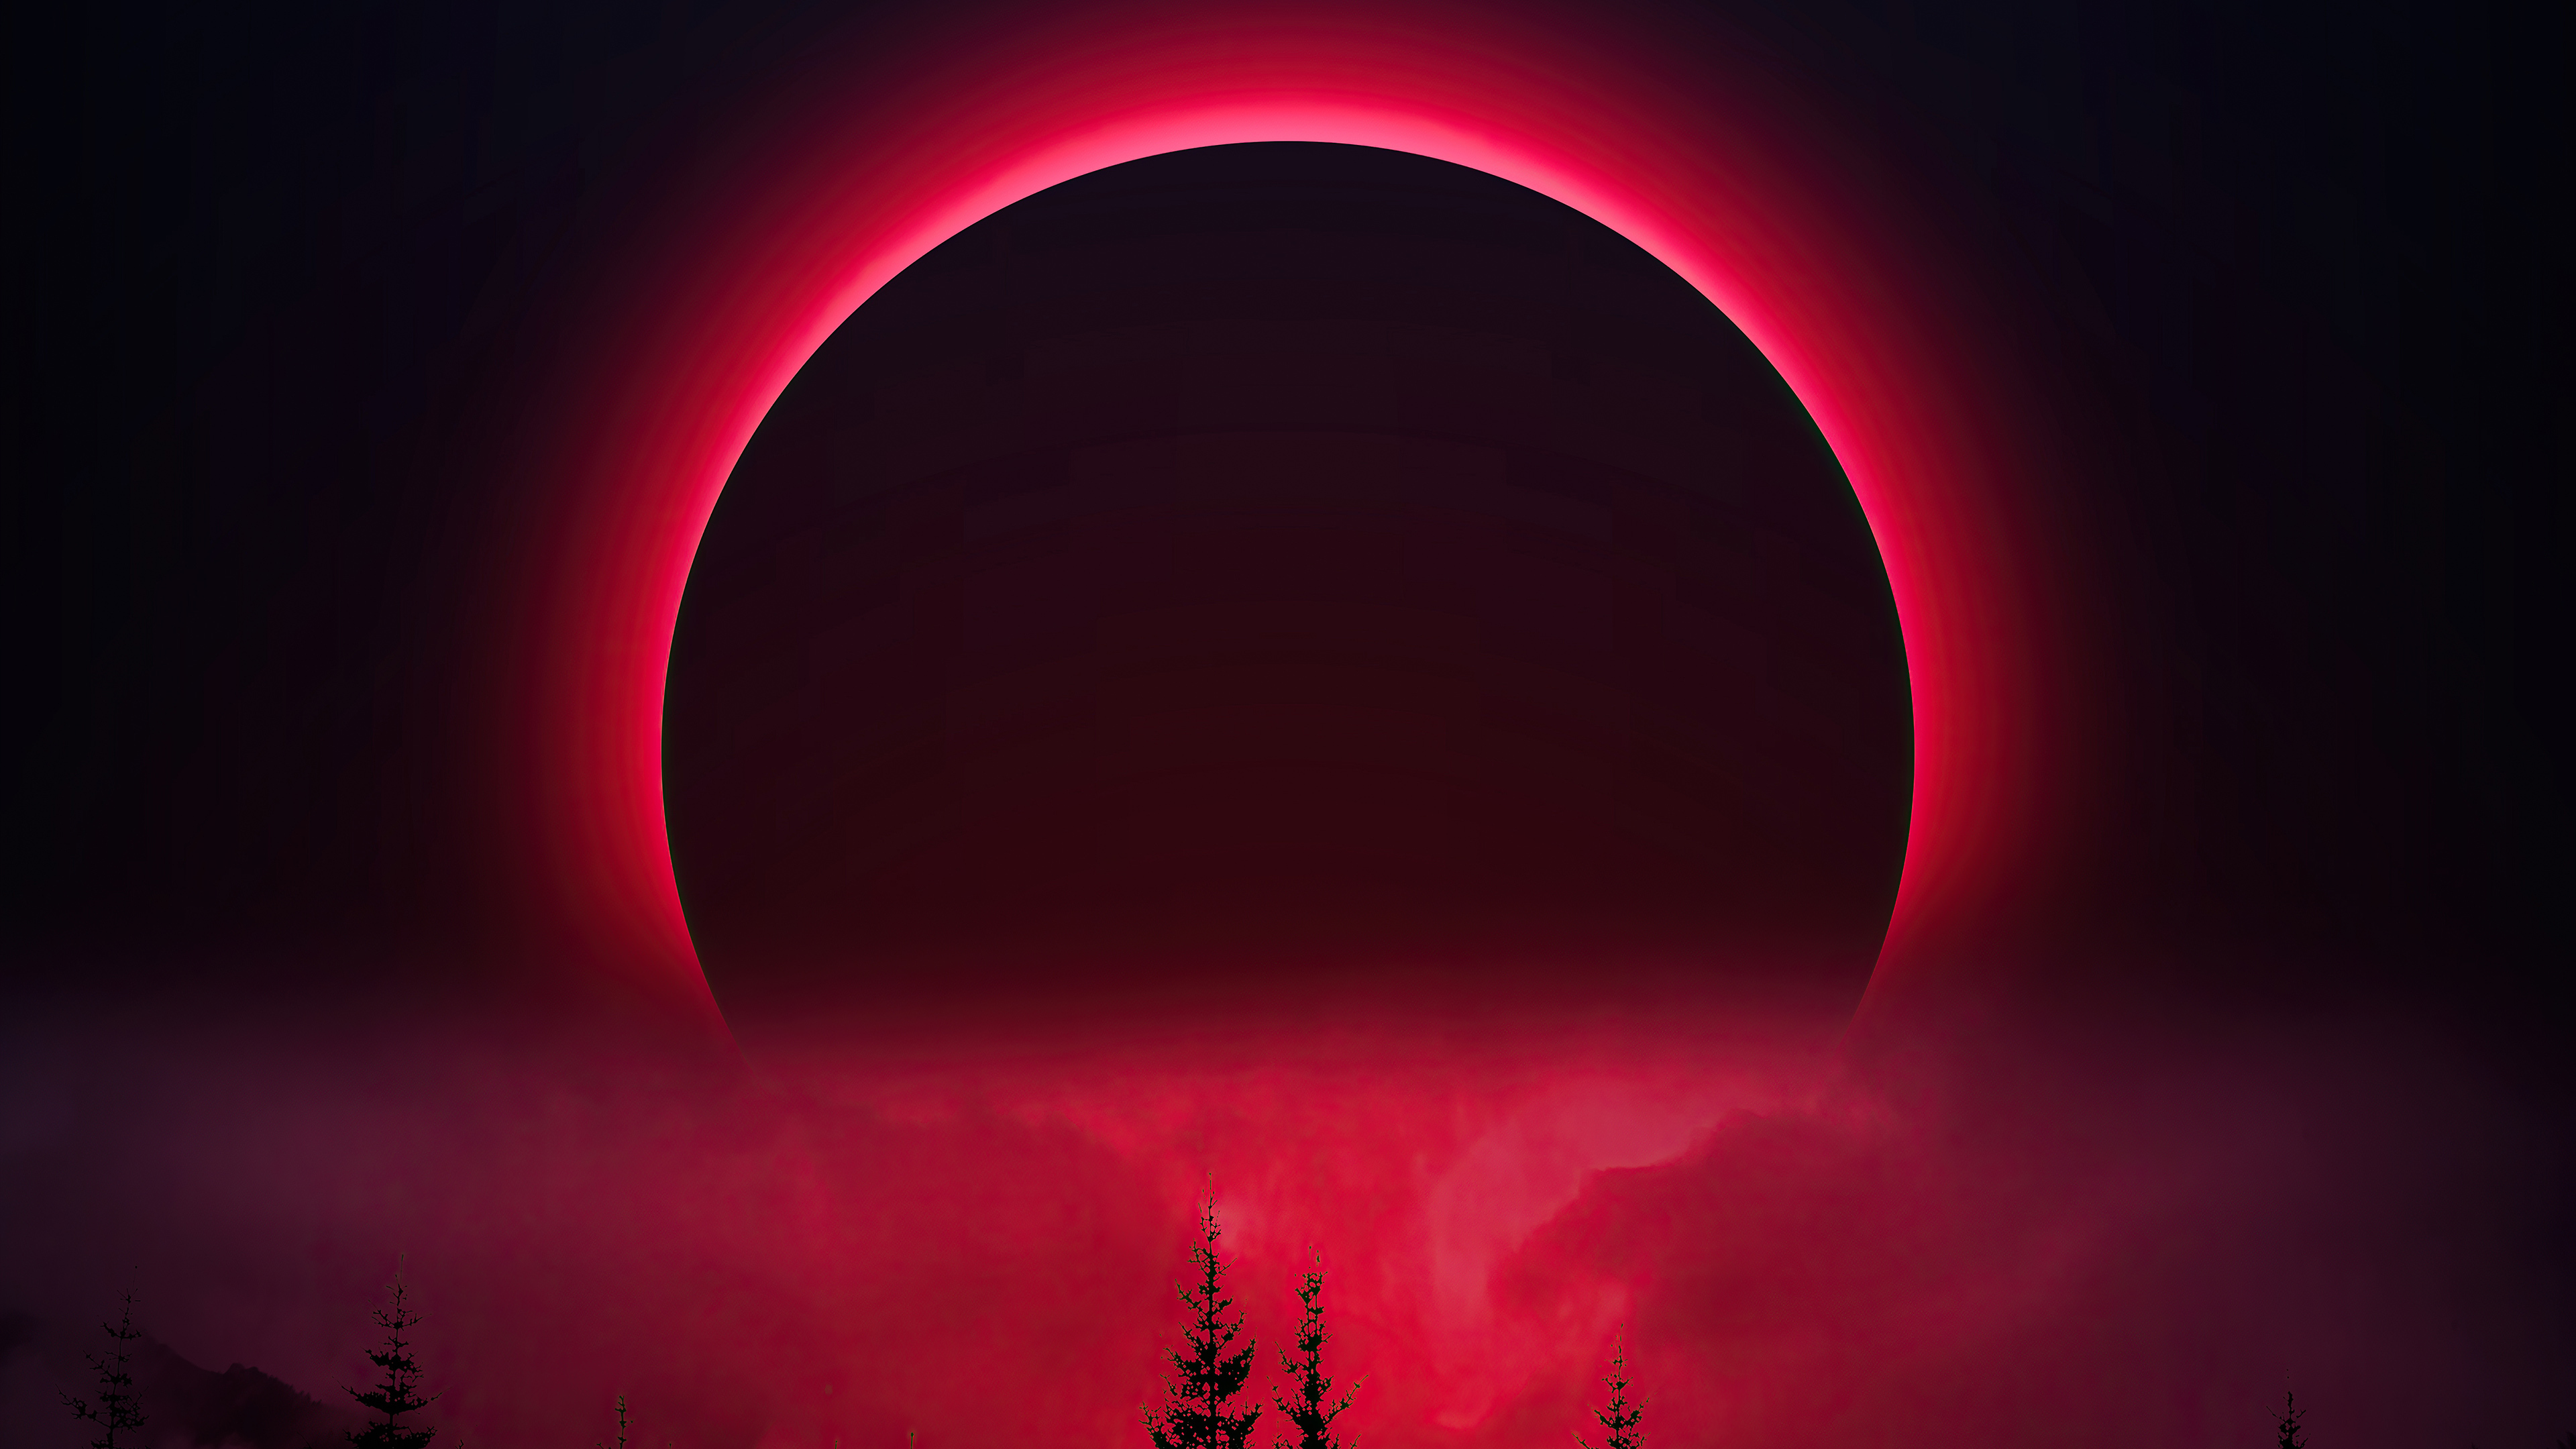 3840x2160 Red Moon 4k Hd 4k Wallpapers Images Backgrounds Photos And Pictures